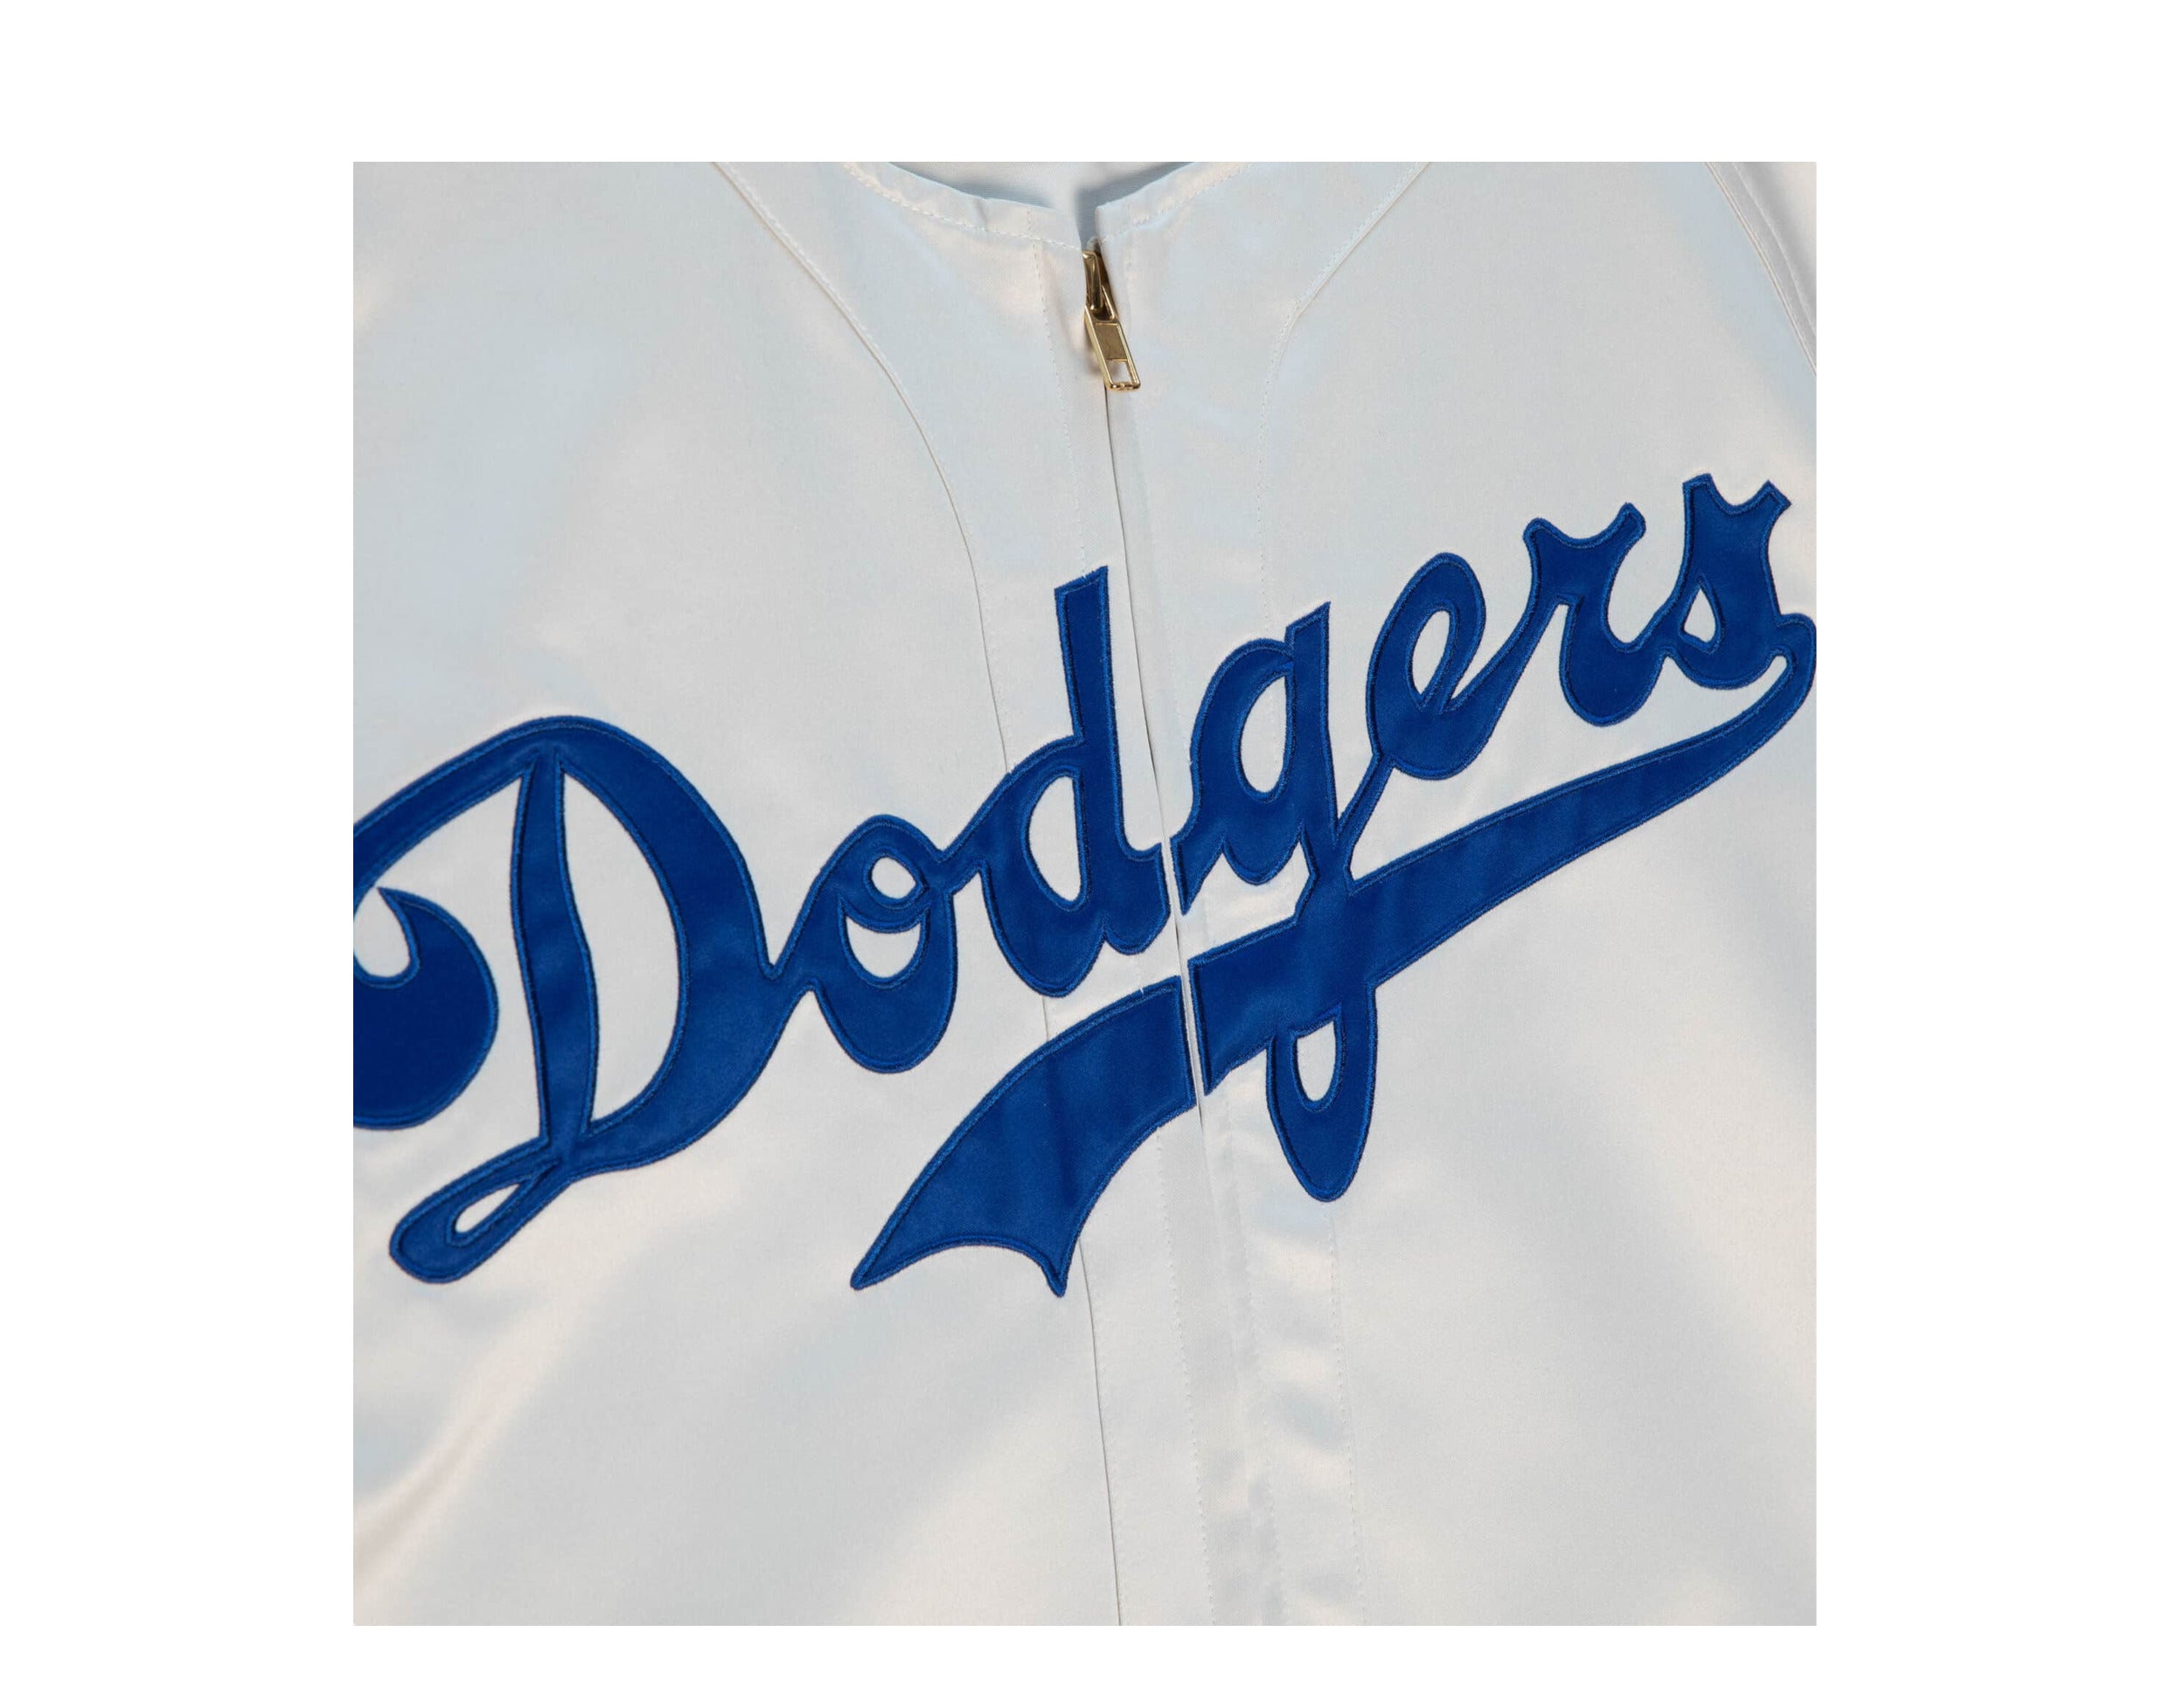 Brooklyn Dodgers Jackie Robinson Mitchell & Ness MLB Authentic